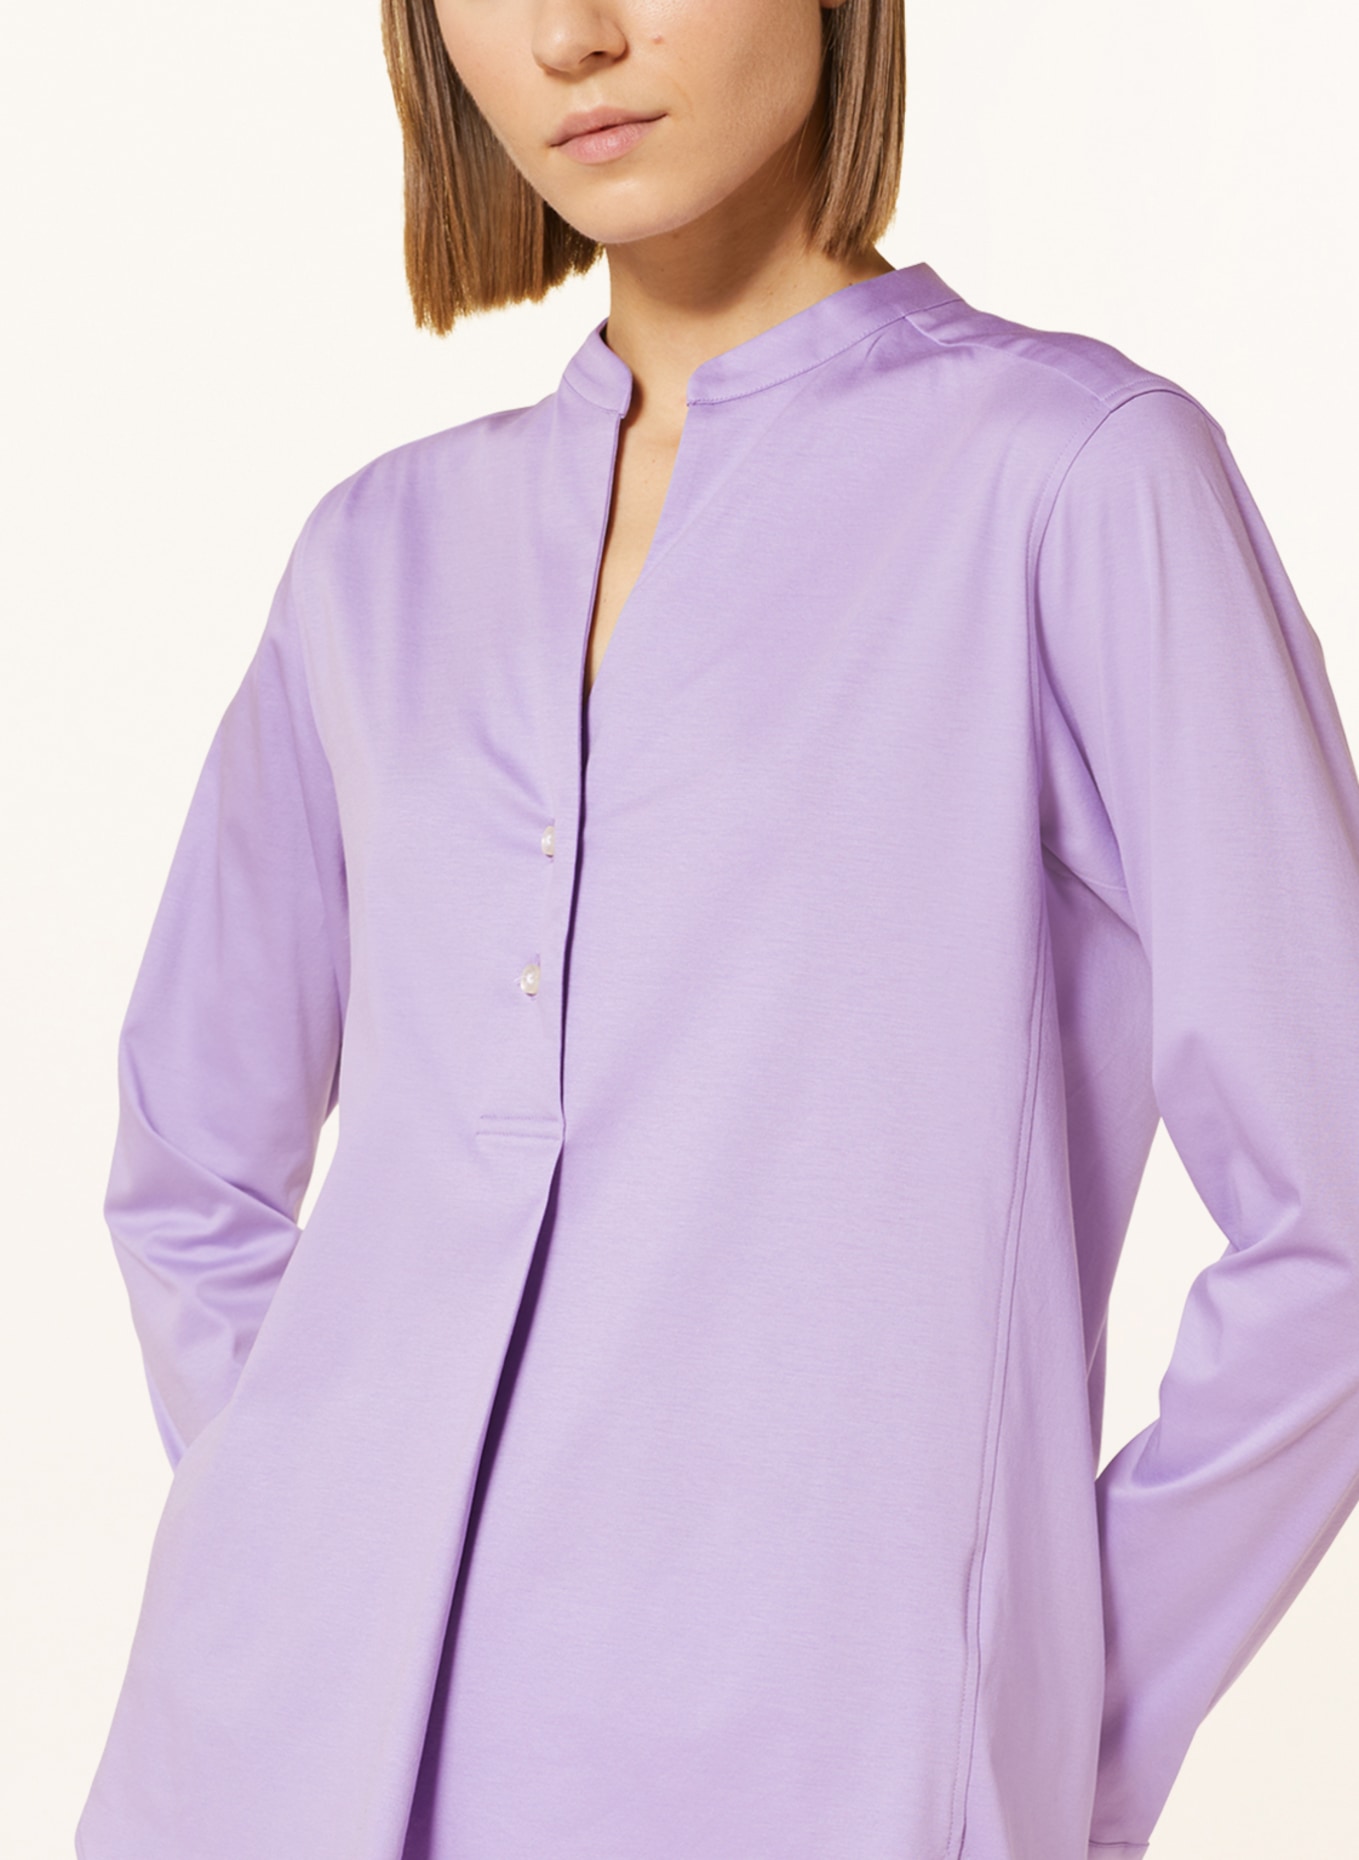 Soluzione Shirt blouse made of jersey, Color: LIGHT PURPLE (Image 4)